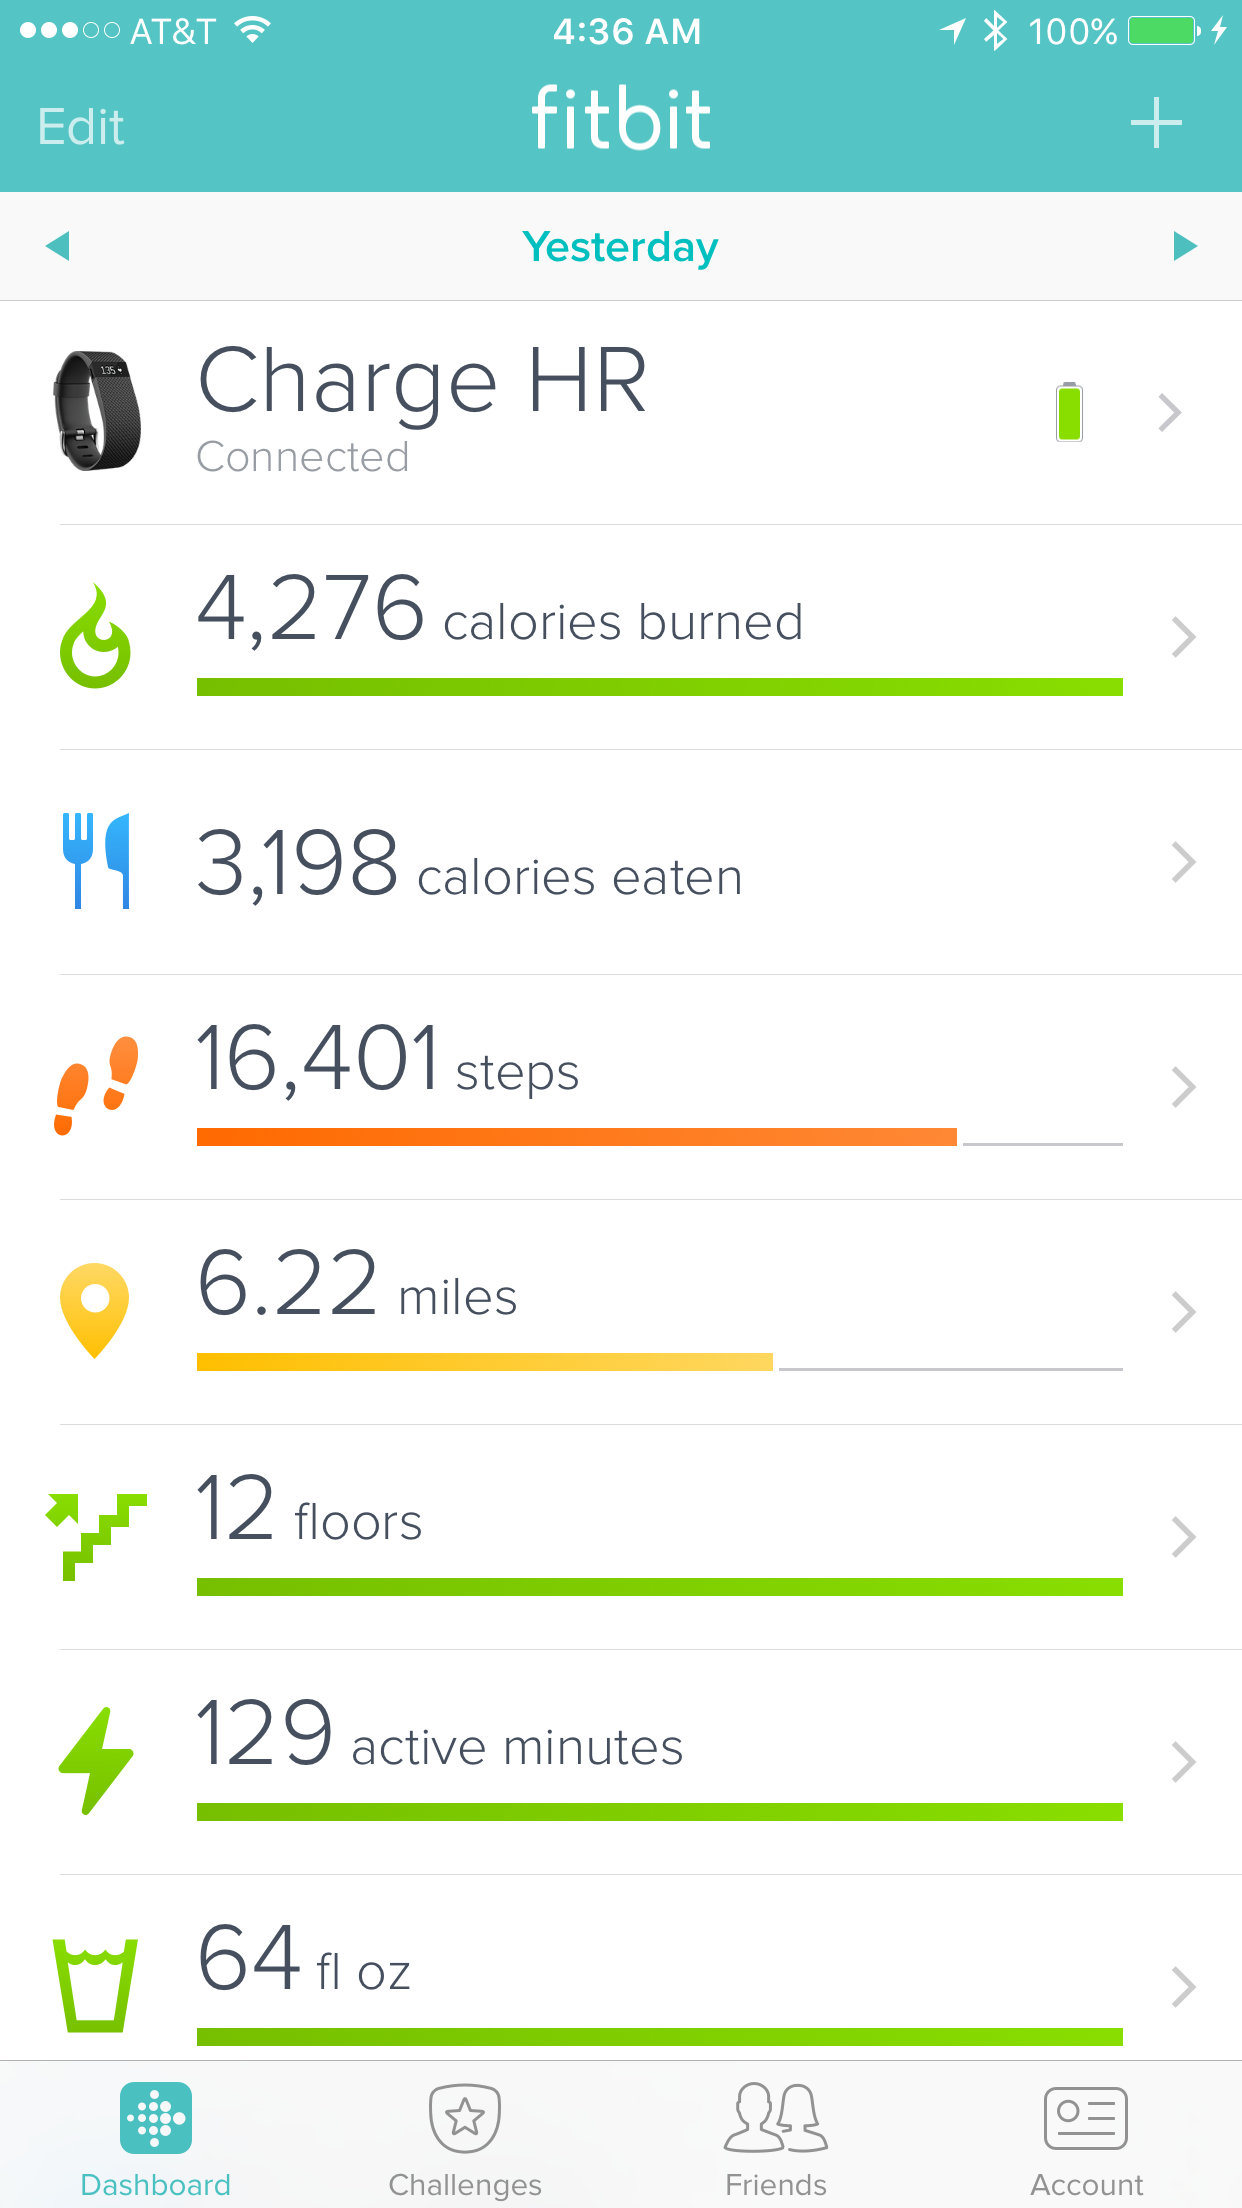 Incorrect Calories Burned????? - Fitbit 